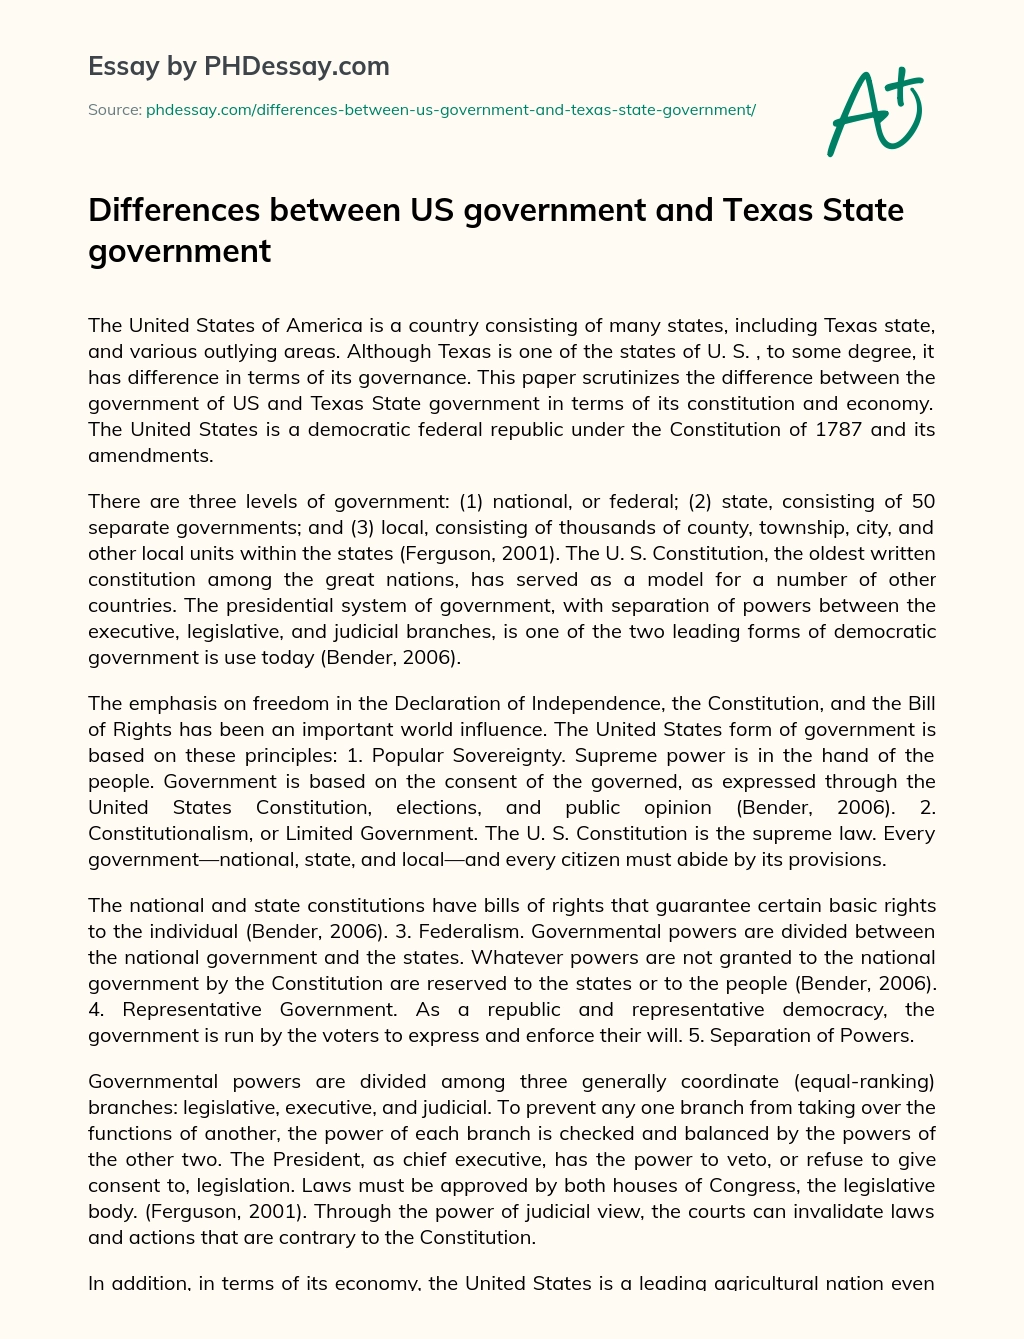 Differences between US government and Texas State government essay